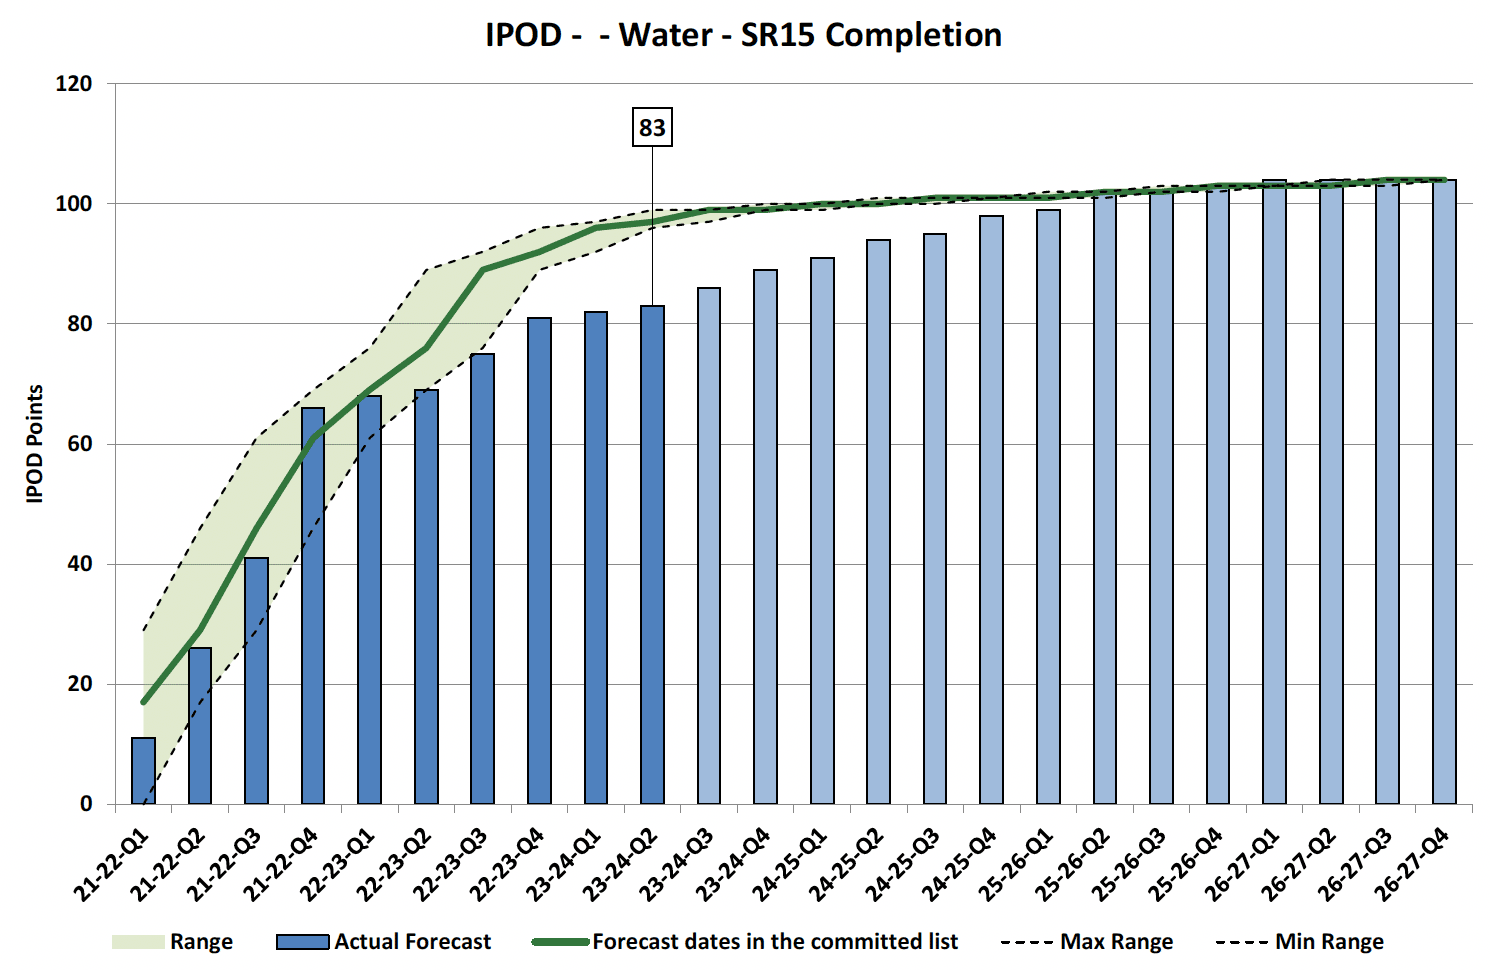 Chart showing IPOD points achieved or forecast for all milestones against target range for SR15 Completion Projects in Water Portfolio